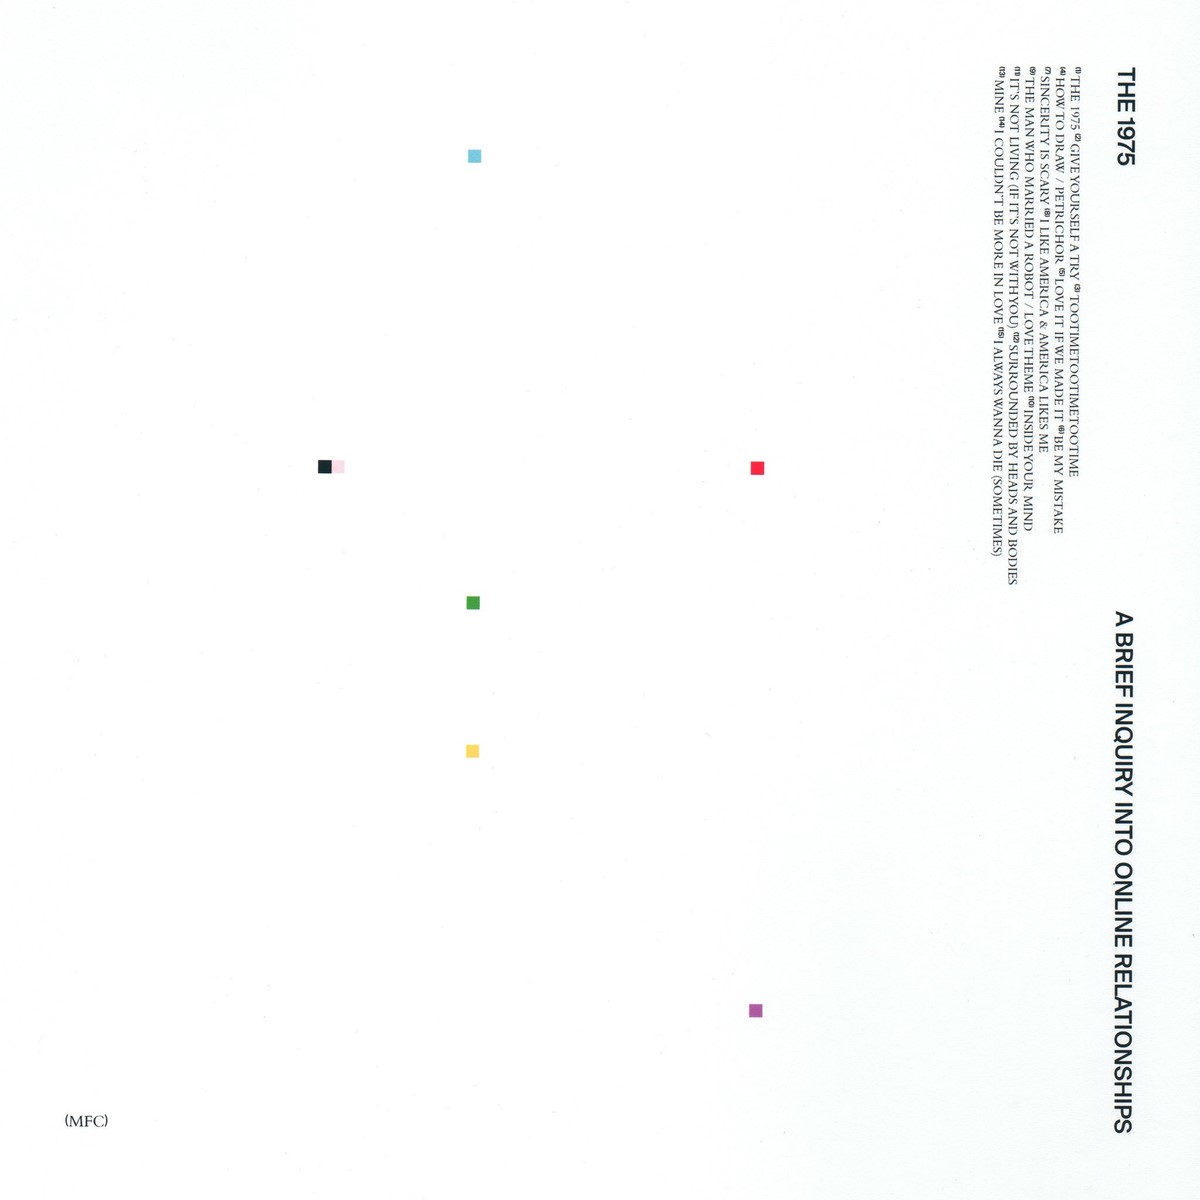 Album cover for "A Brief Inquiry into Online Relationships" by The 1975